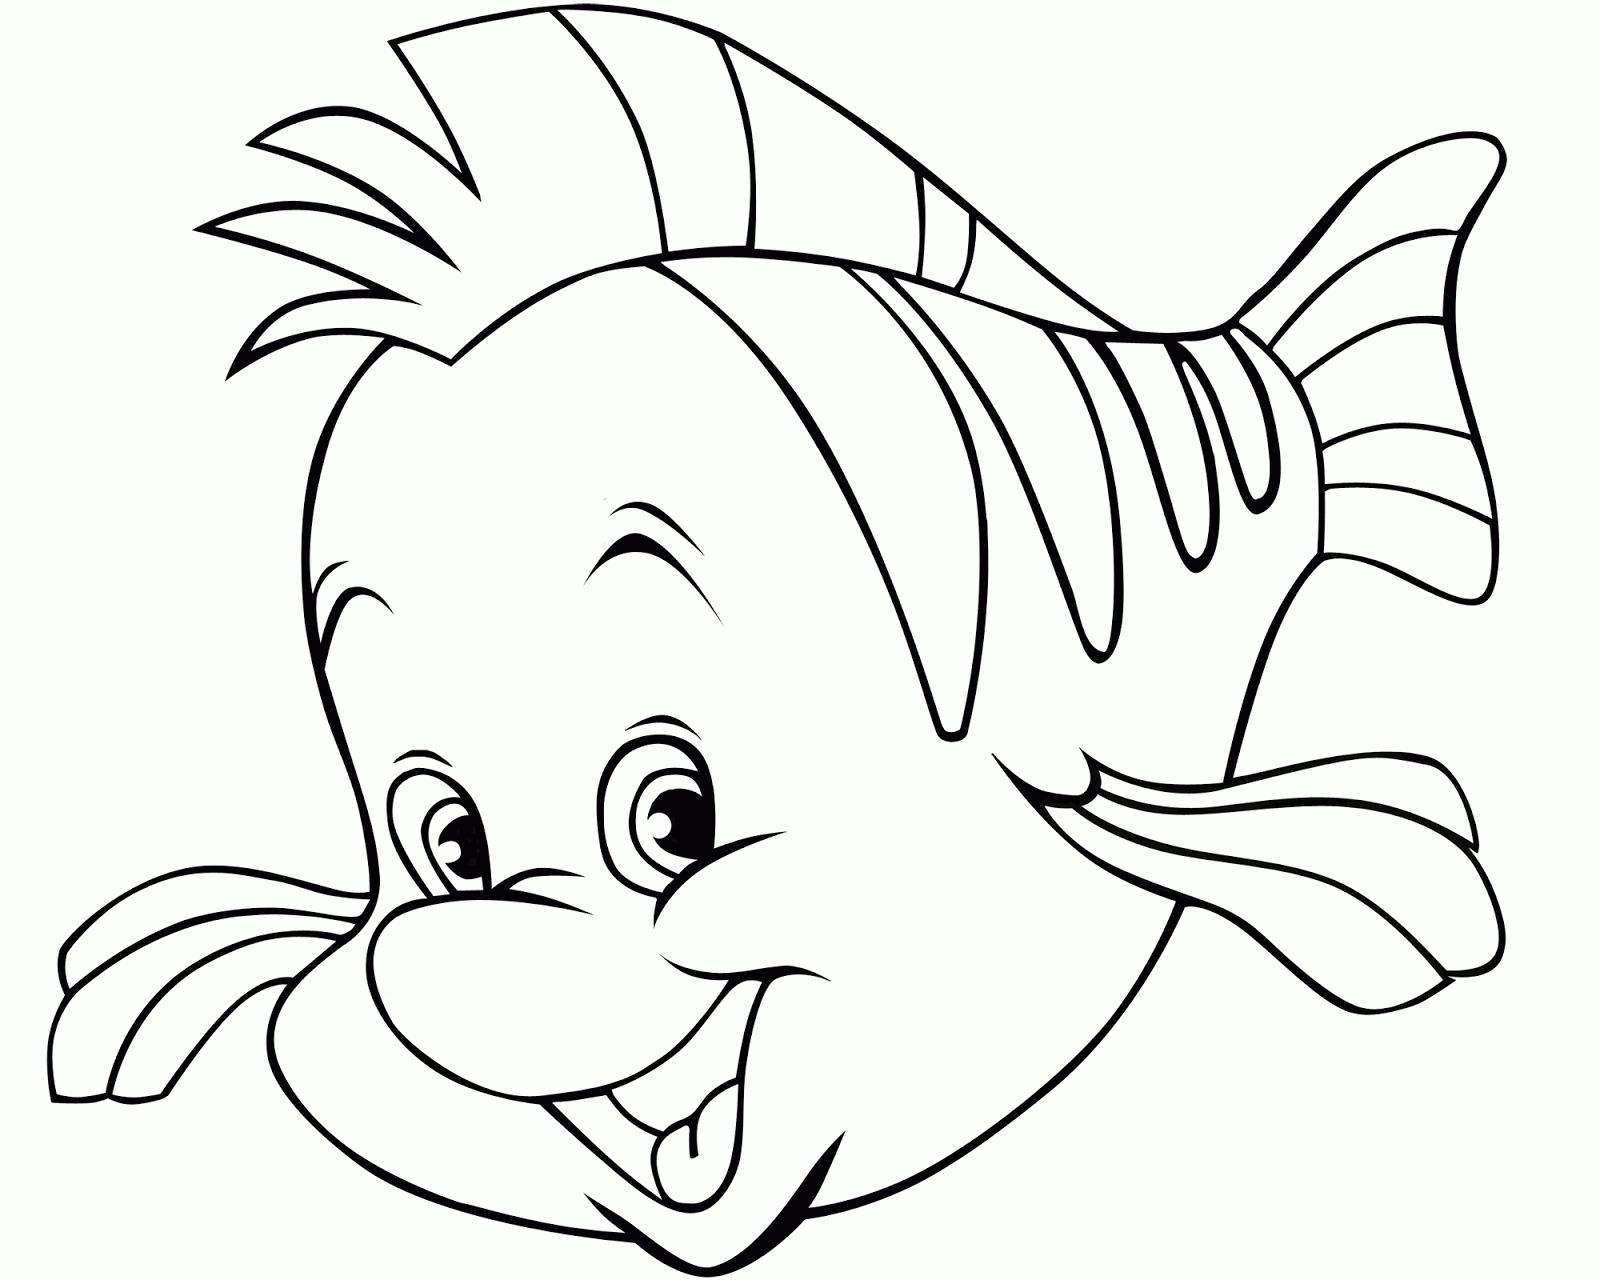 Free Coloring Pages Of Golden Fish Coloring Wallpapers Download Free Images Wallpaper [coloring654.blogspot.com]